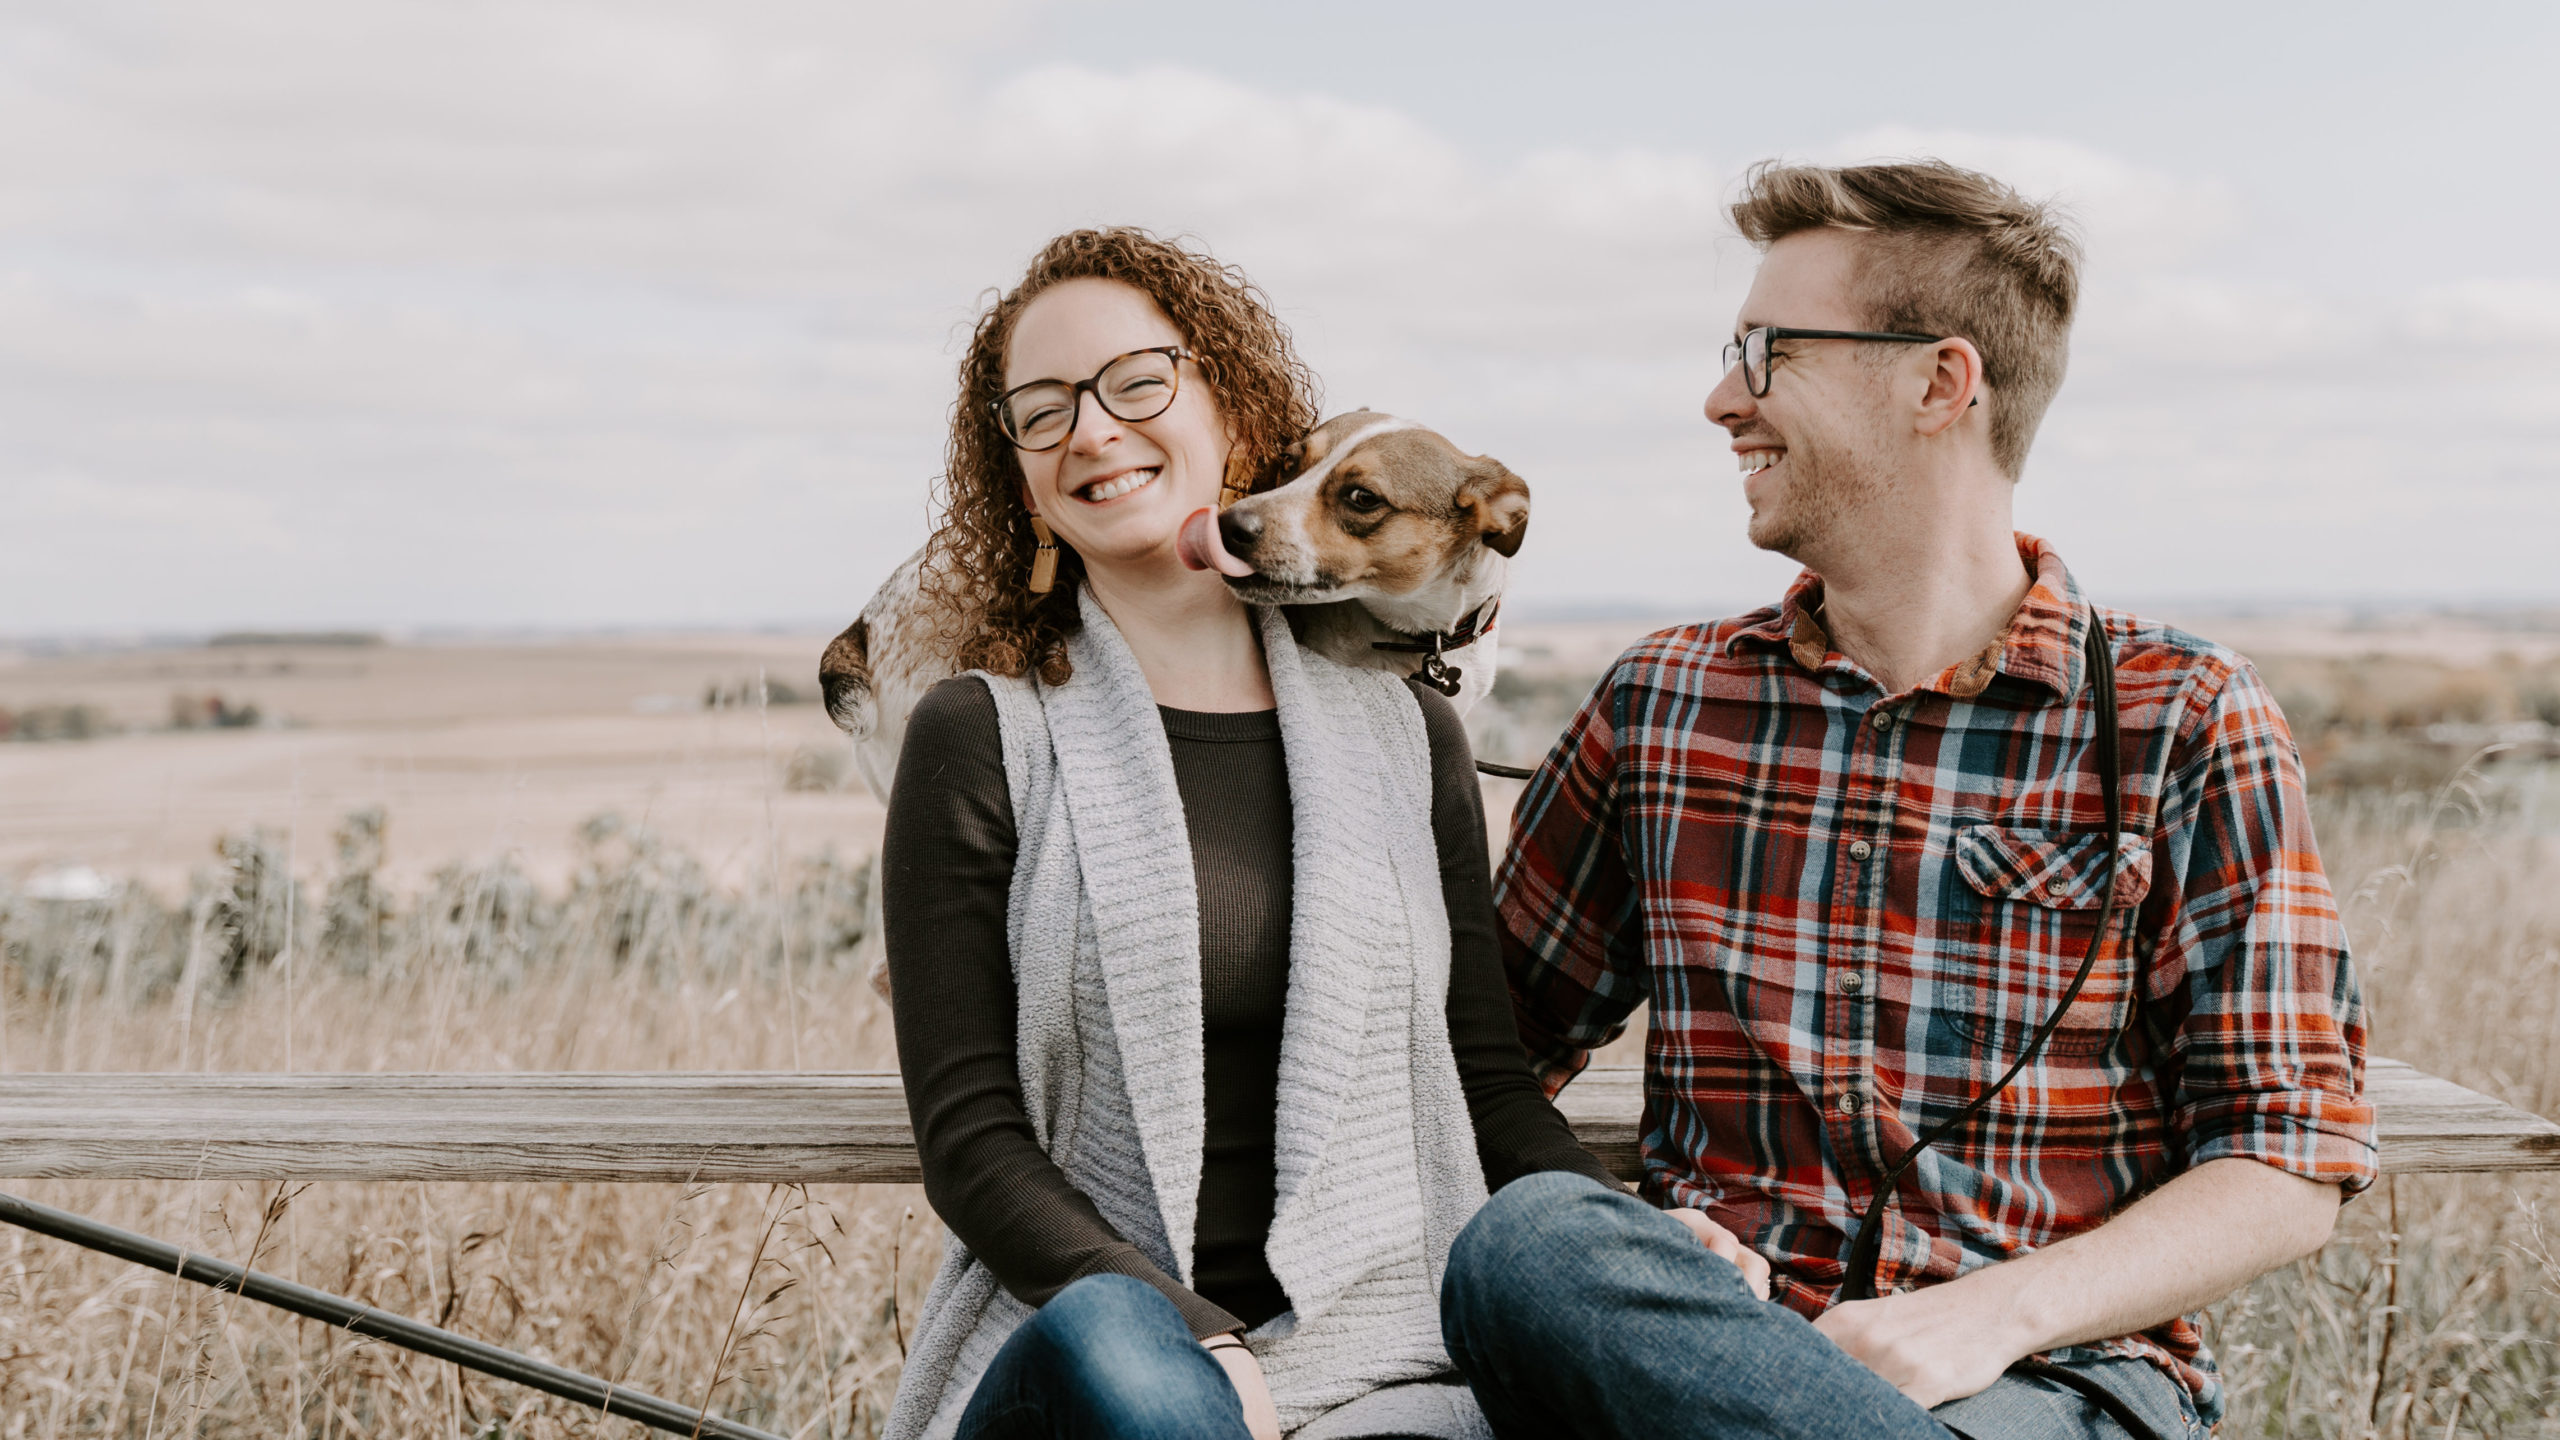 woman, partner, and dog on adventure in rural America